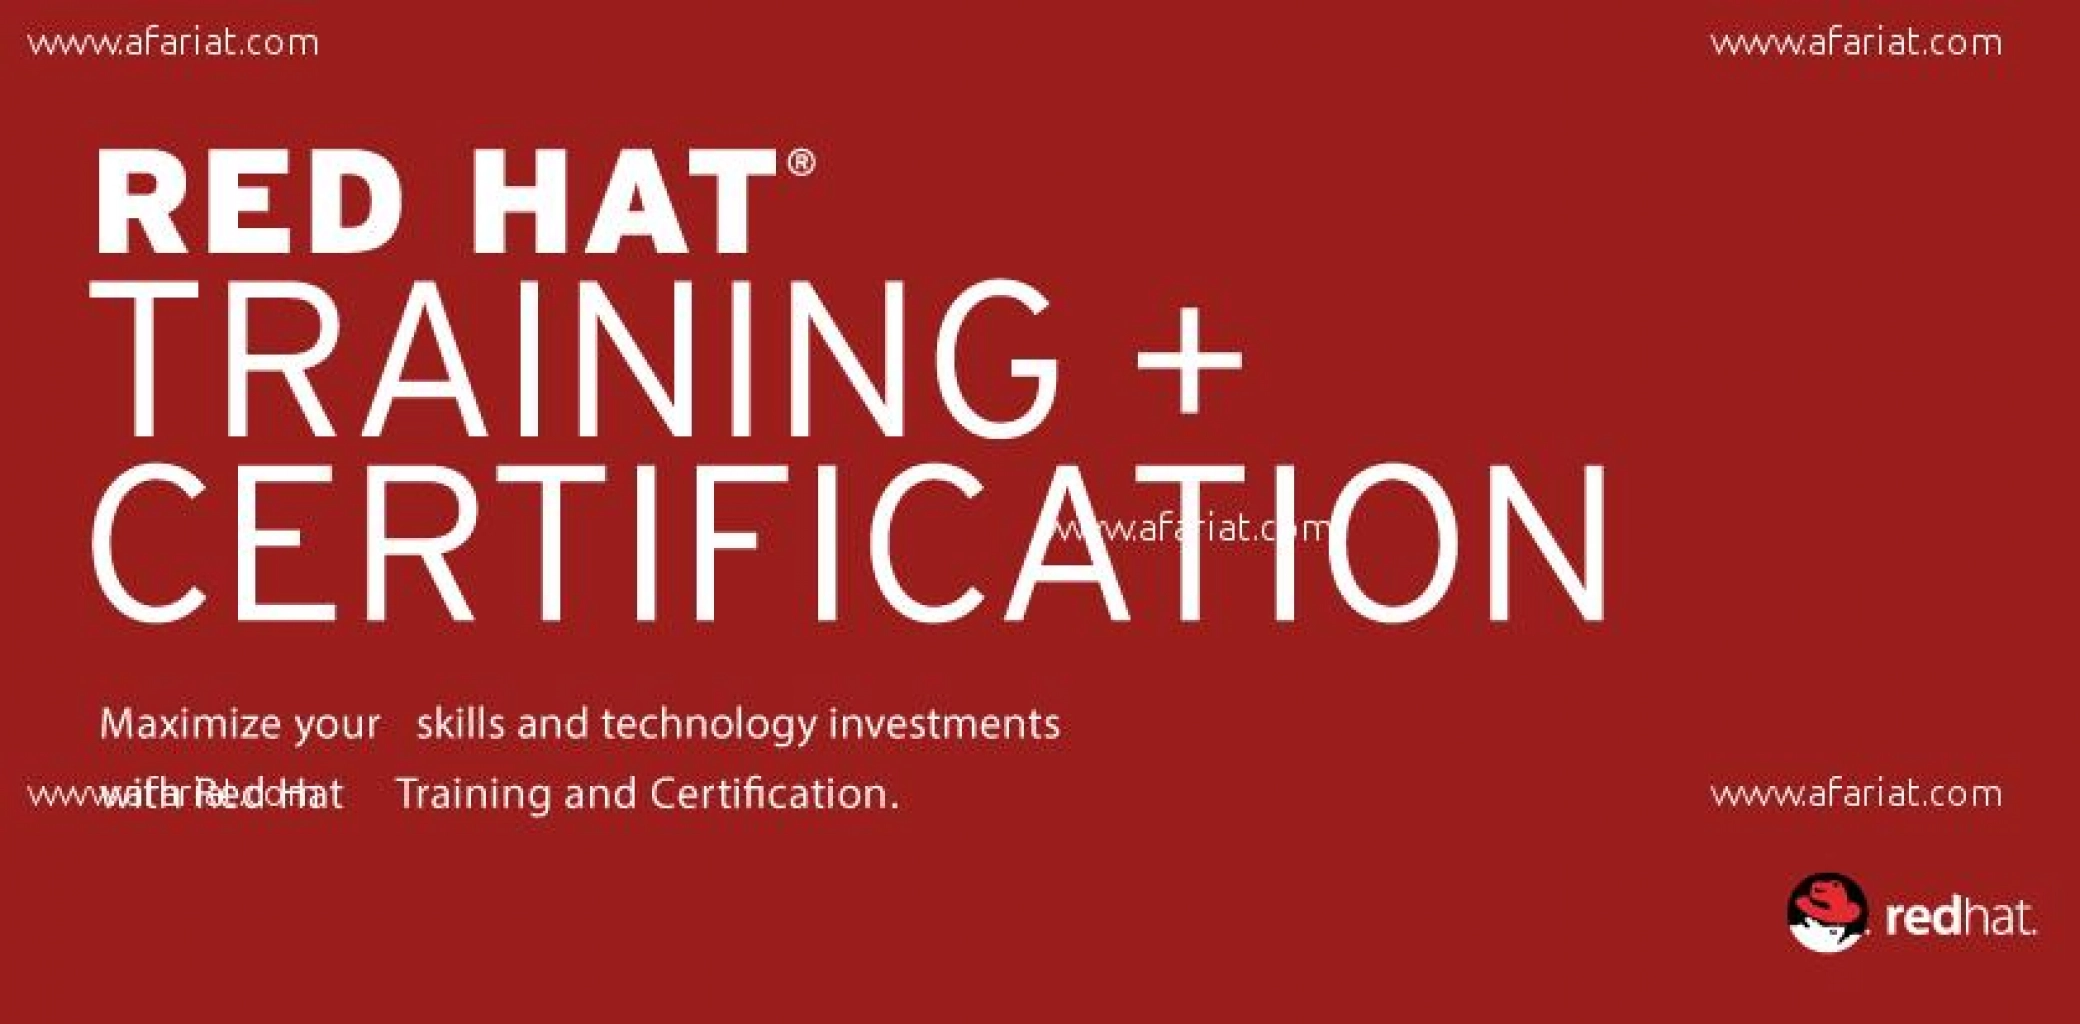 Administrateur RedHat + Certifications